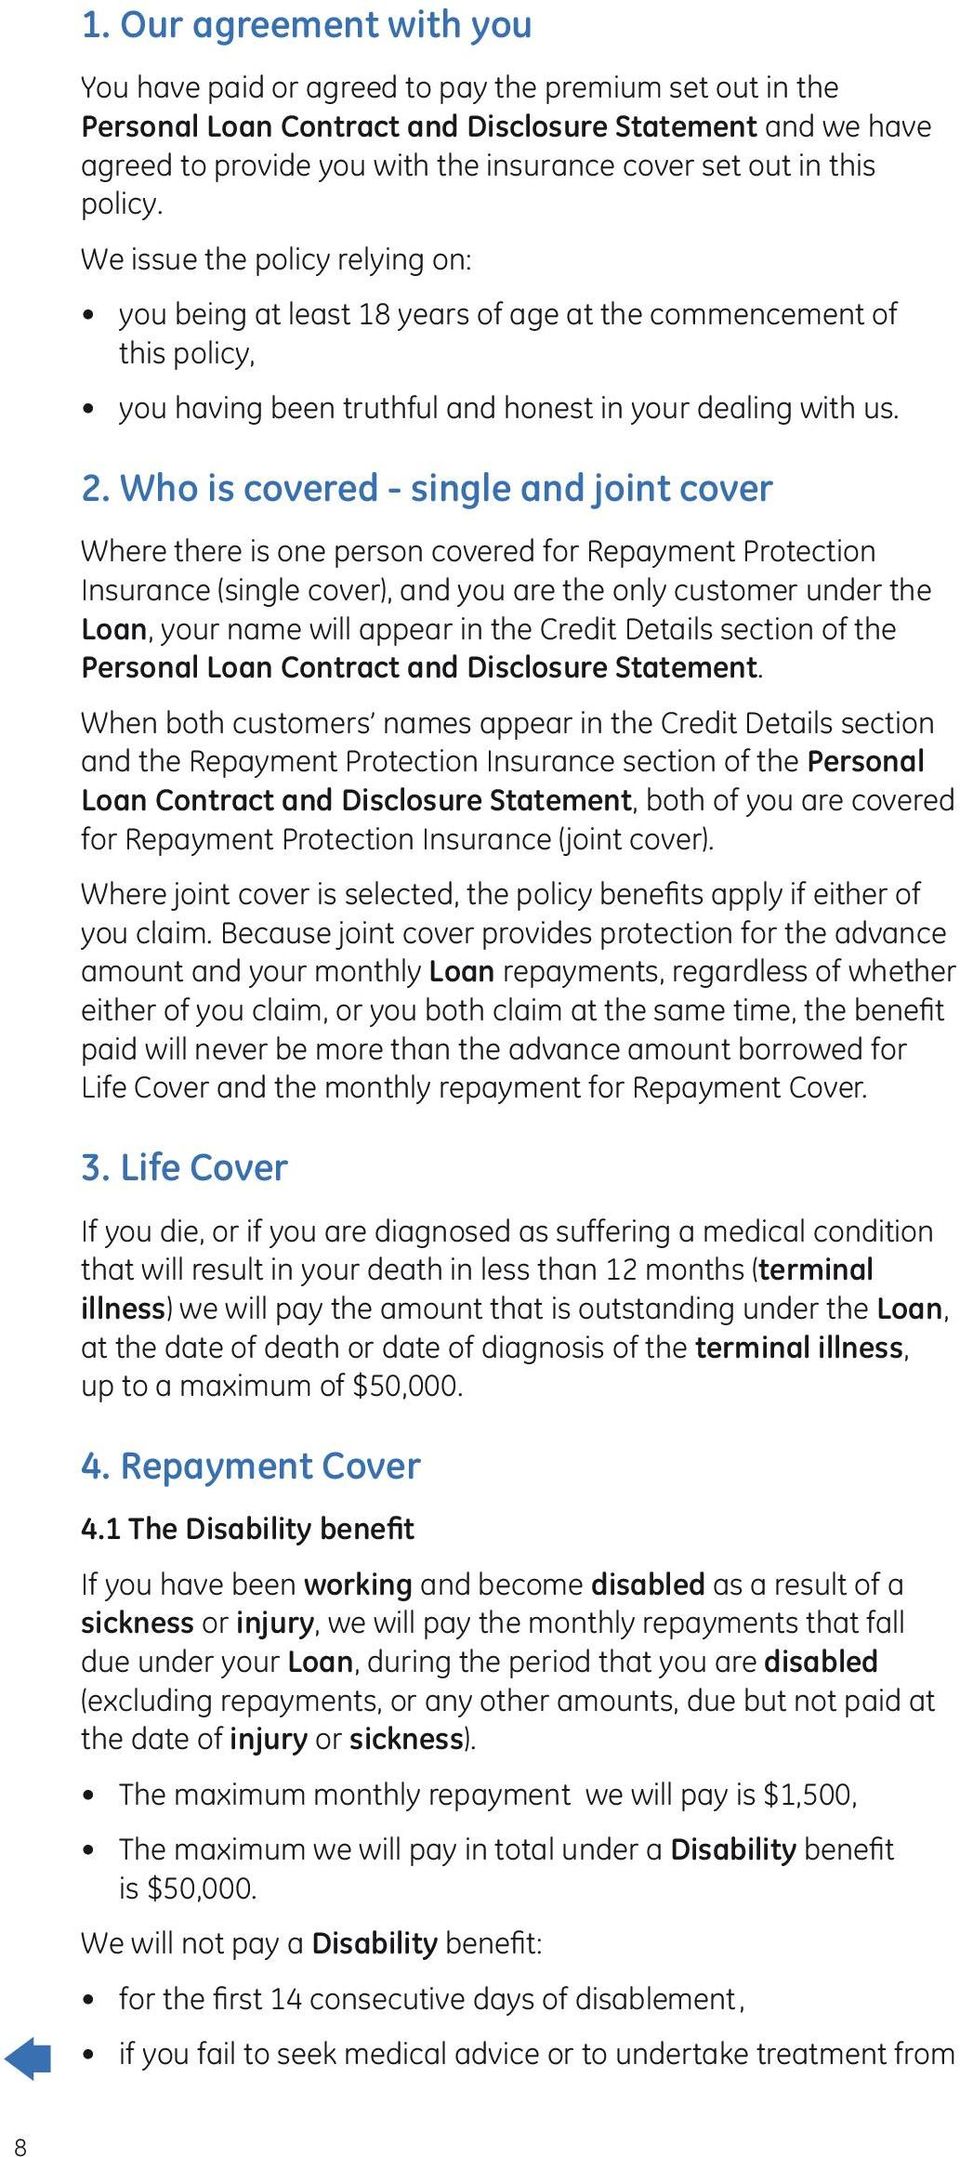 Who is covered - single and joint cover Where there is one person covered for Repayment Protection Insurance (single cover), and you are the only customer under the Loan, your name will appear in the